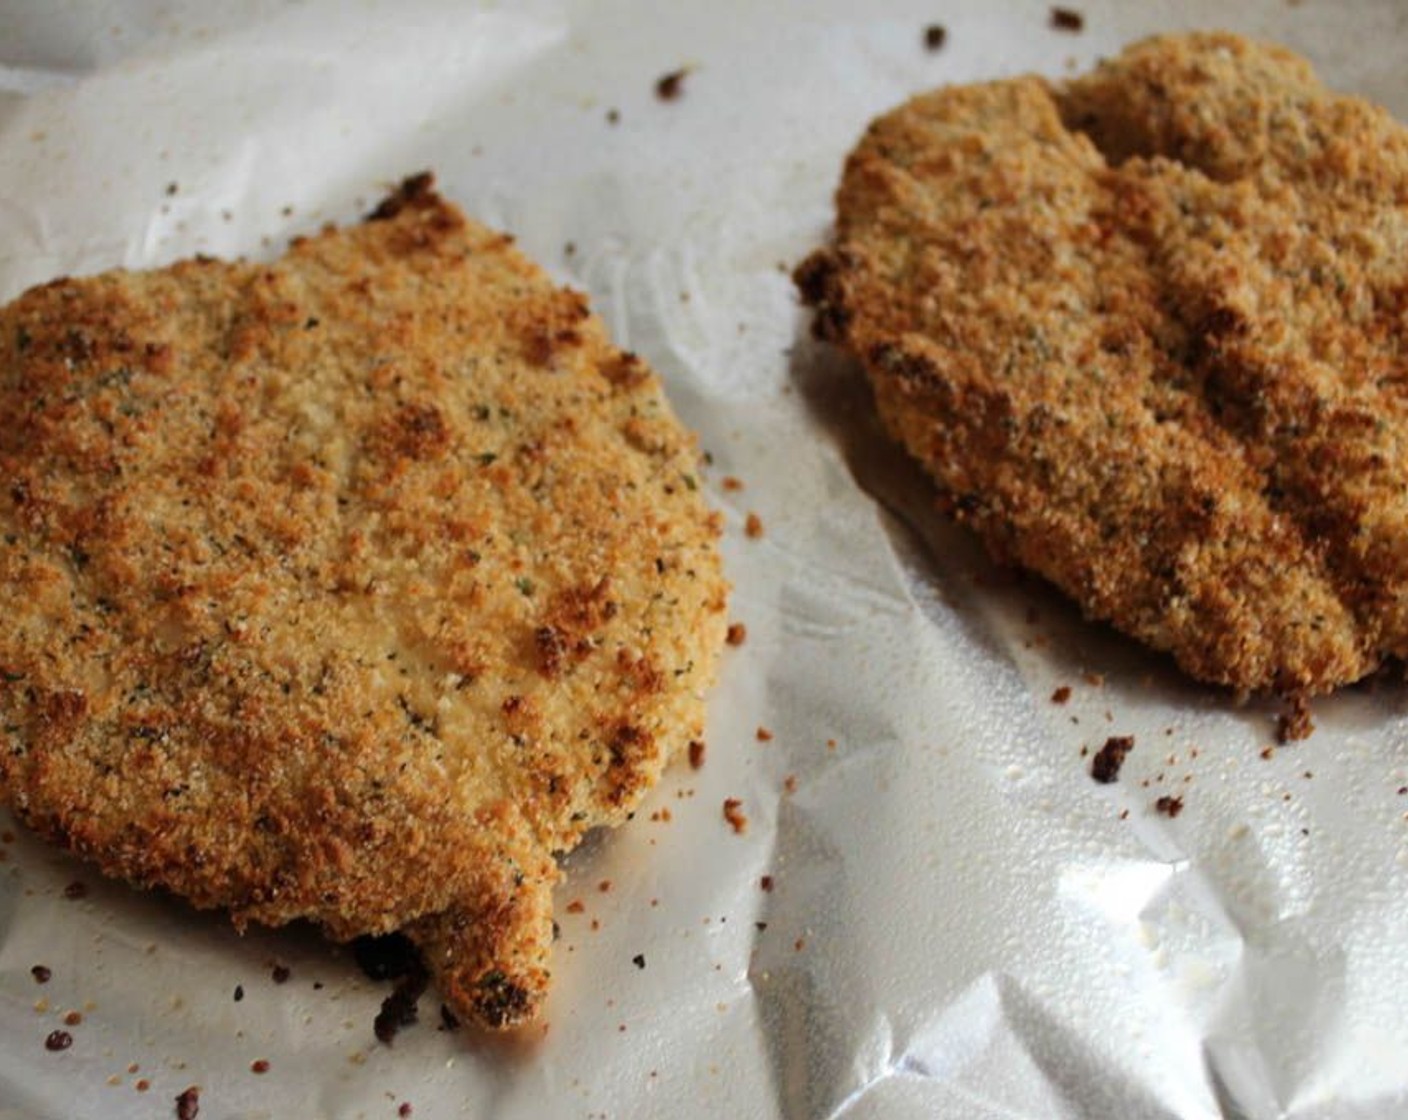 step 7 Place the breaded cutlets on the prepared baking sheet and bake for 25 minutes until they are golden brown and the chicken is cooked through. If they are not browned enough, just pop them under the boiler for 90 seconds or so, and they'll get nice and crispy.